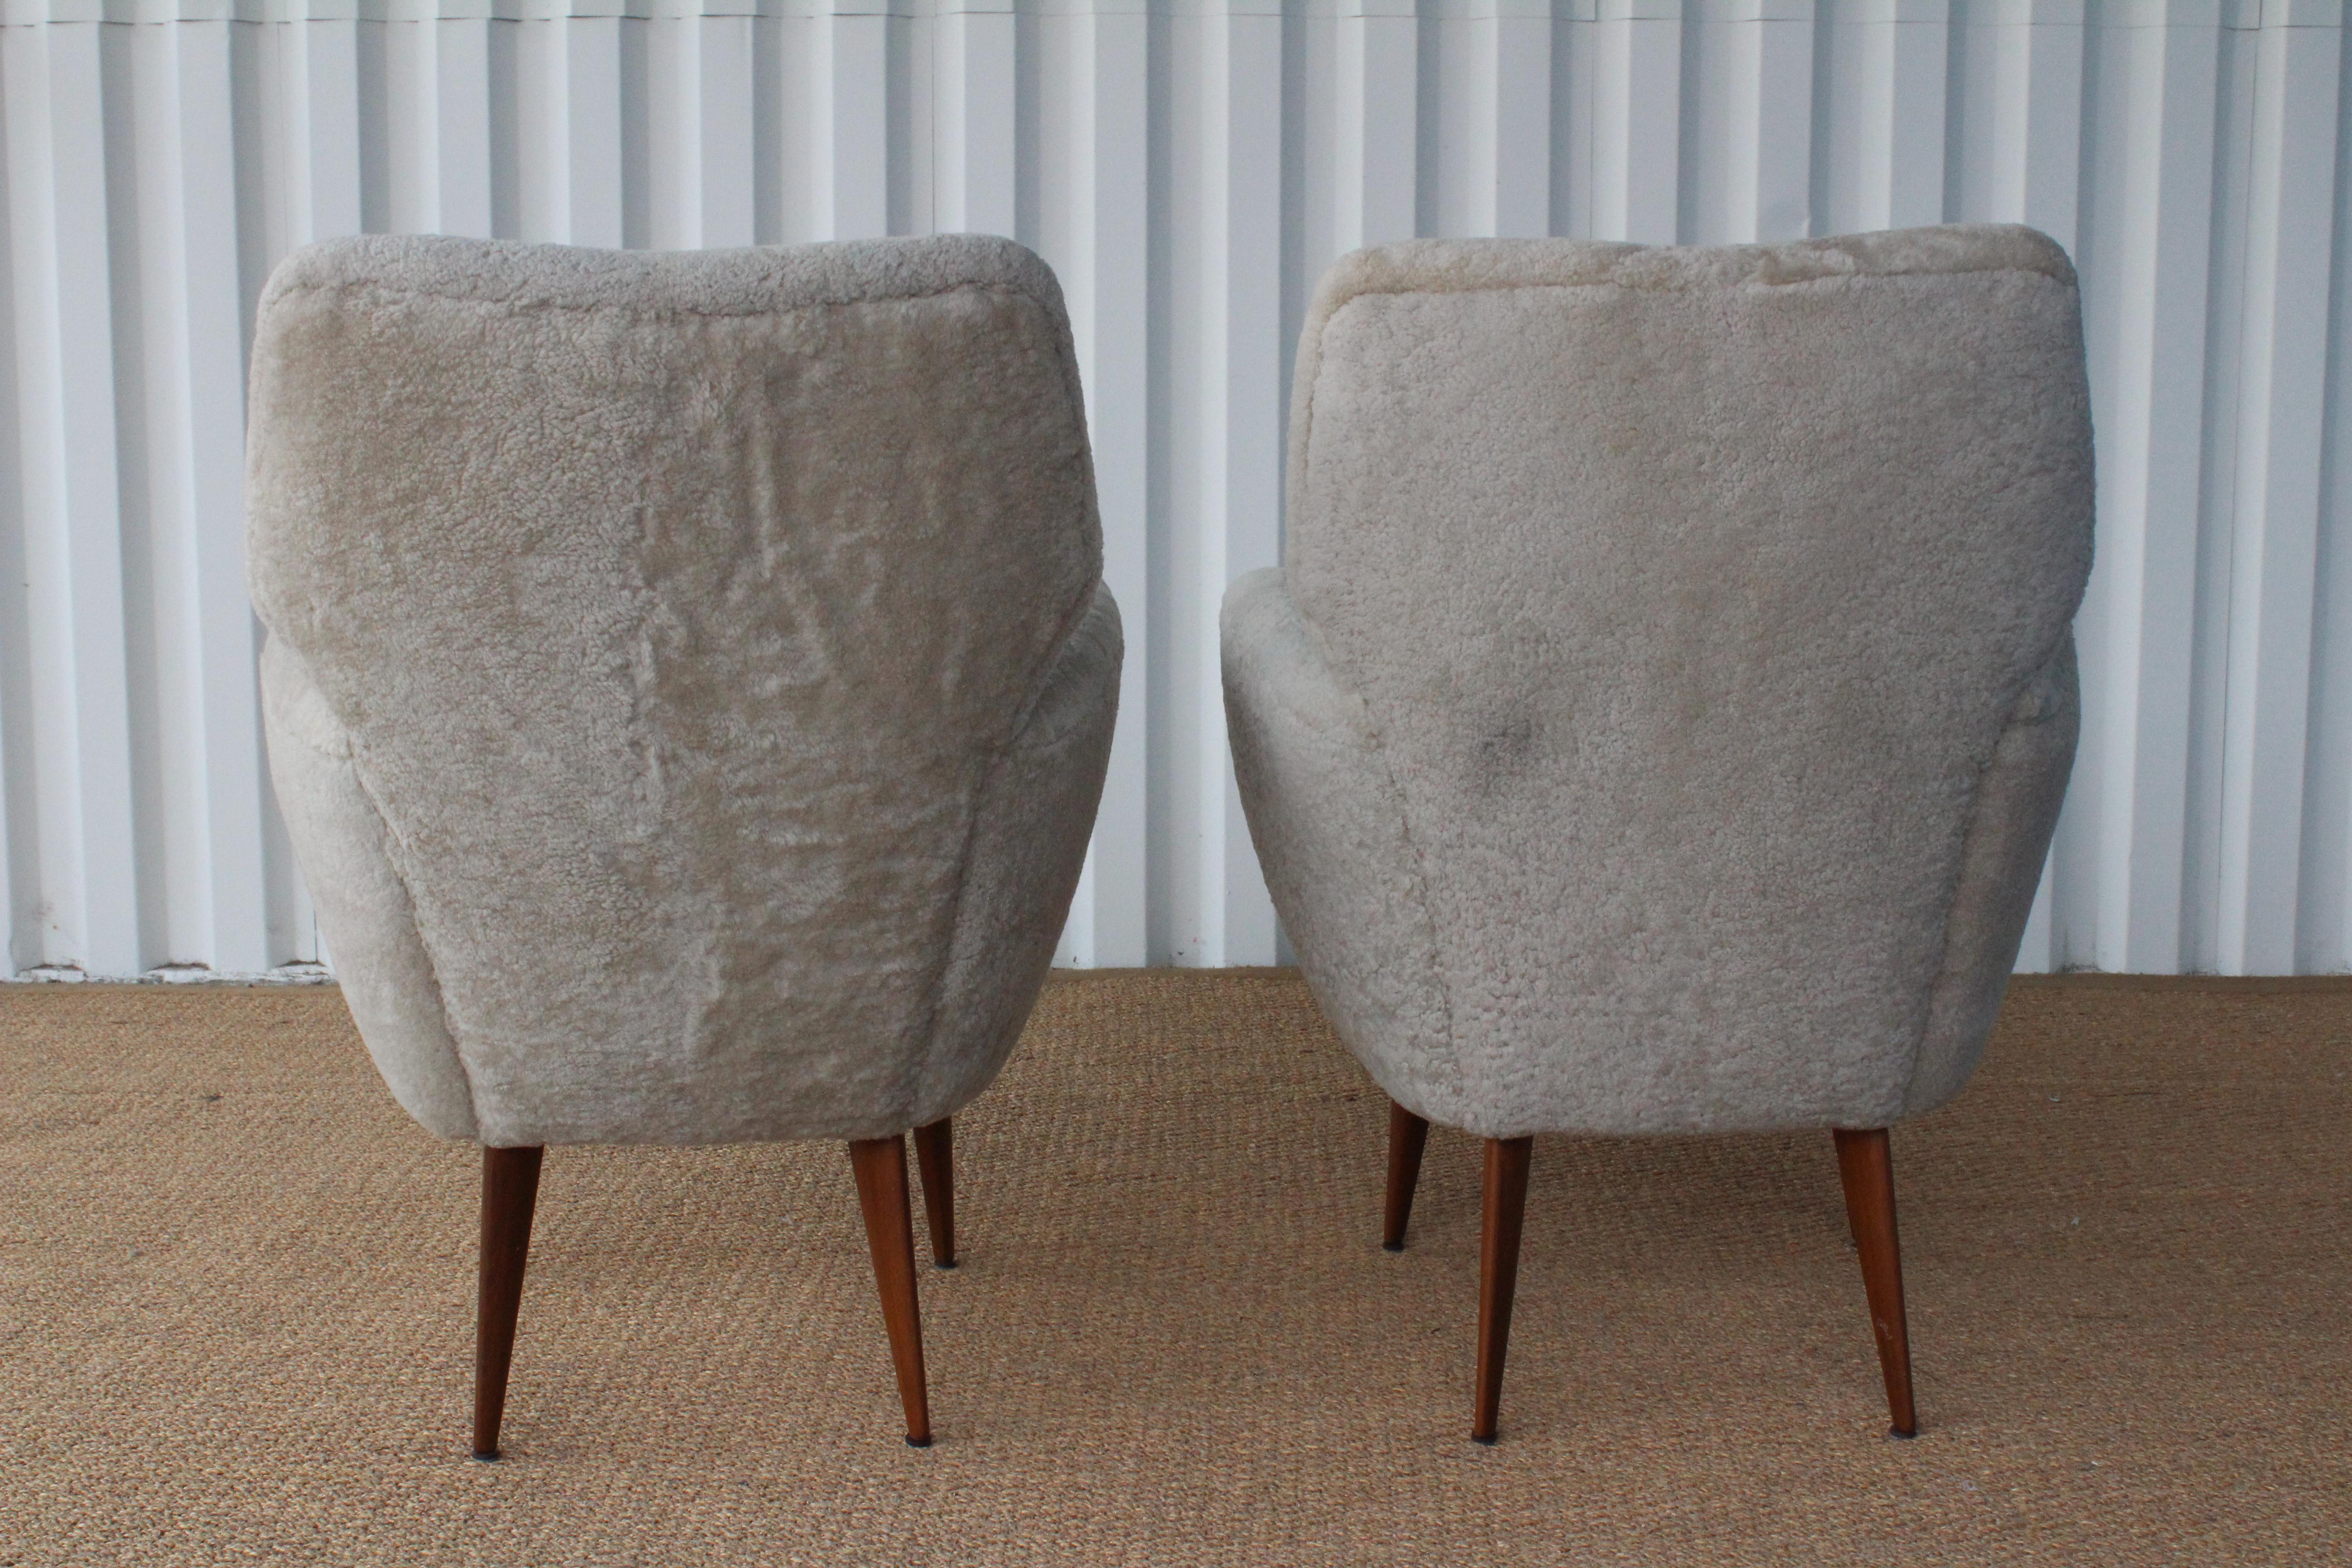 Italian Pair of Shearling Armchairs Attributed to Gio Ponti, Italy, 1950s